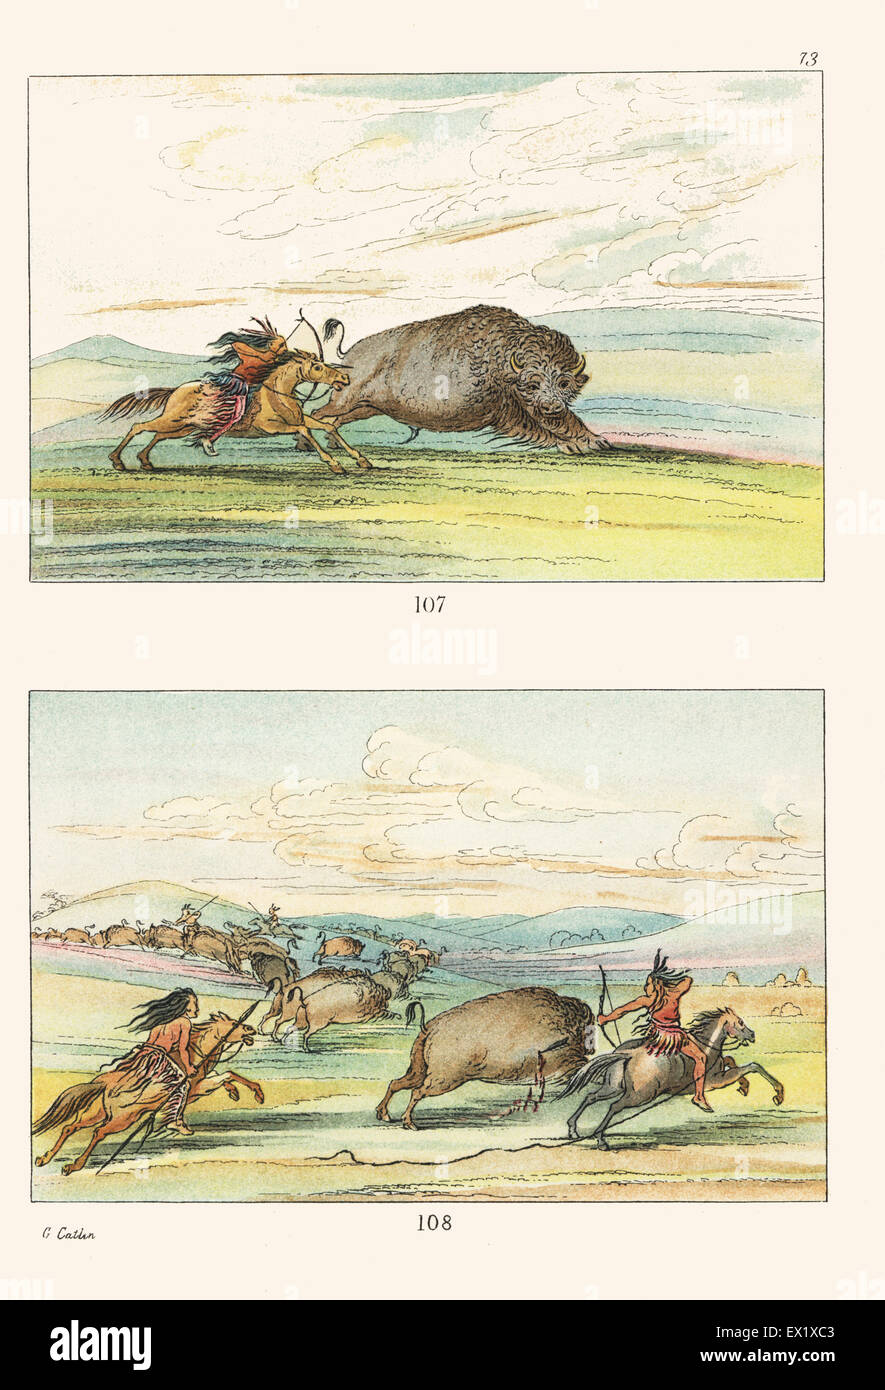 Native American a buffalo or bison with bow and arrow 107, and party of hunters with lance, bow and lasso separating a bison from the herd 108. Handcoloured lithograph from